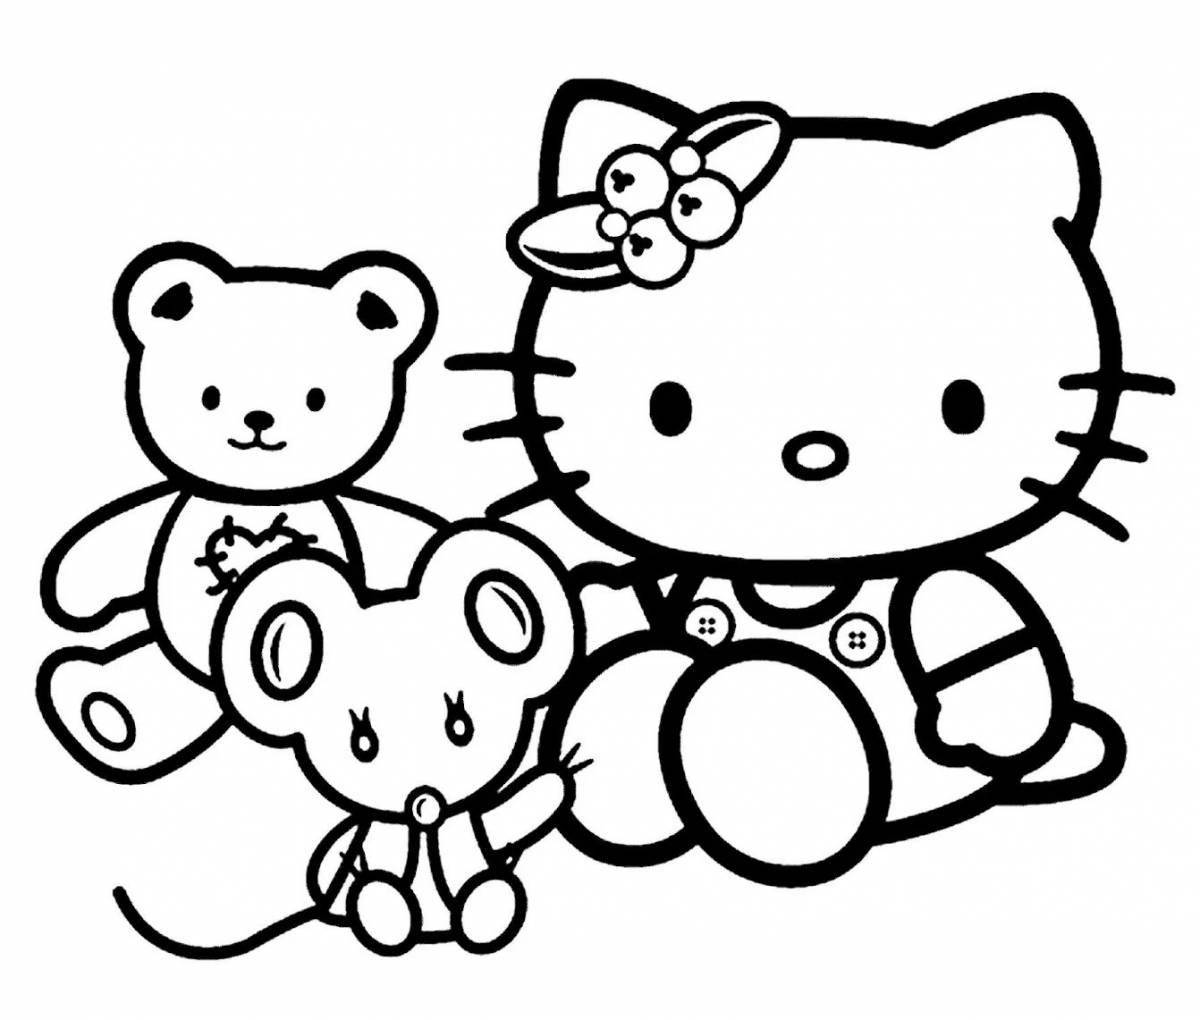 Caty's colorful coloring page